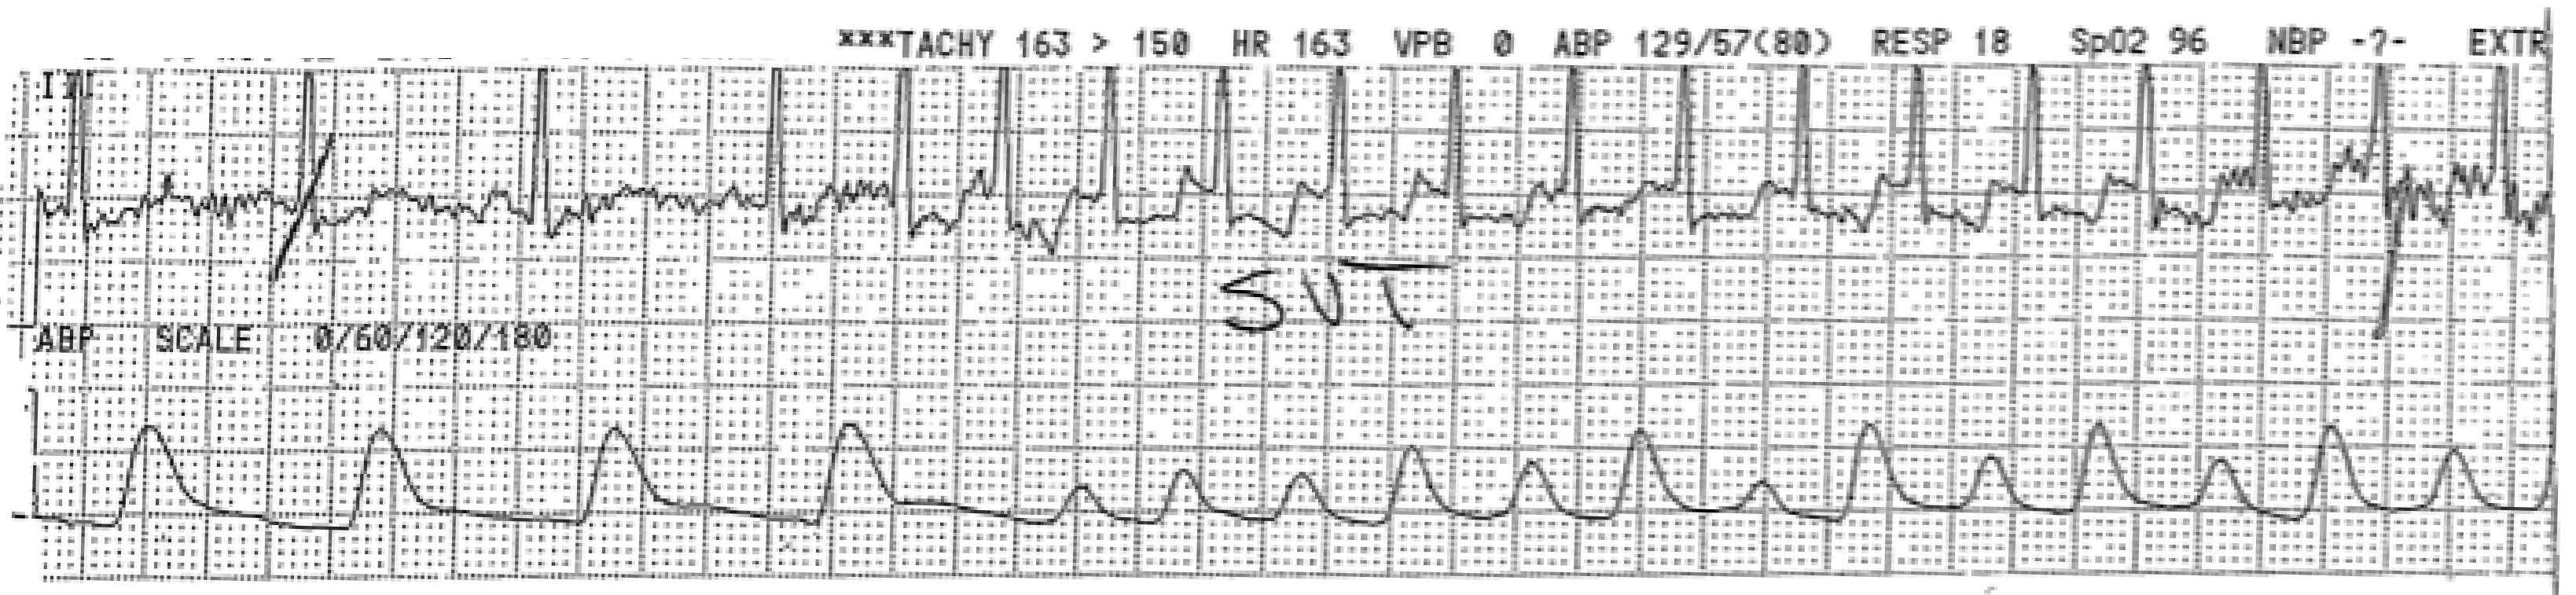 SVT as a cause of syncope